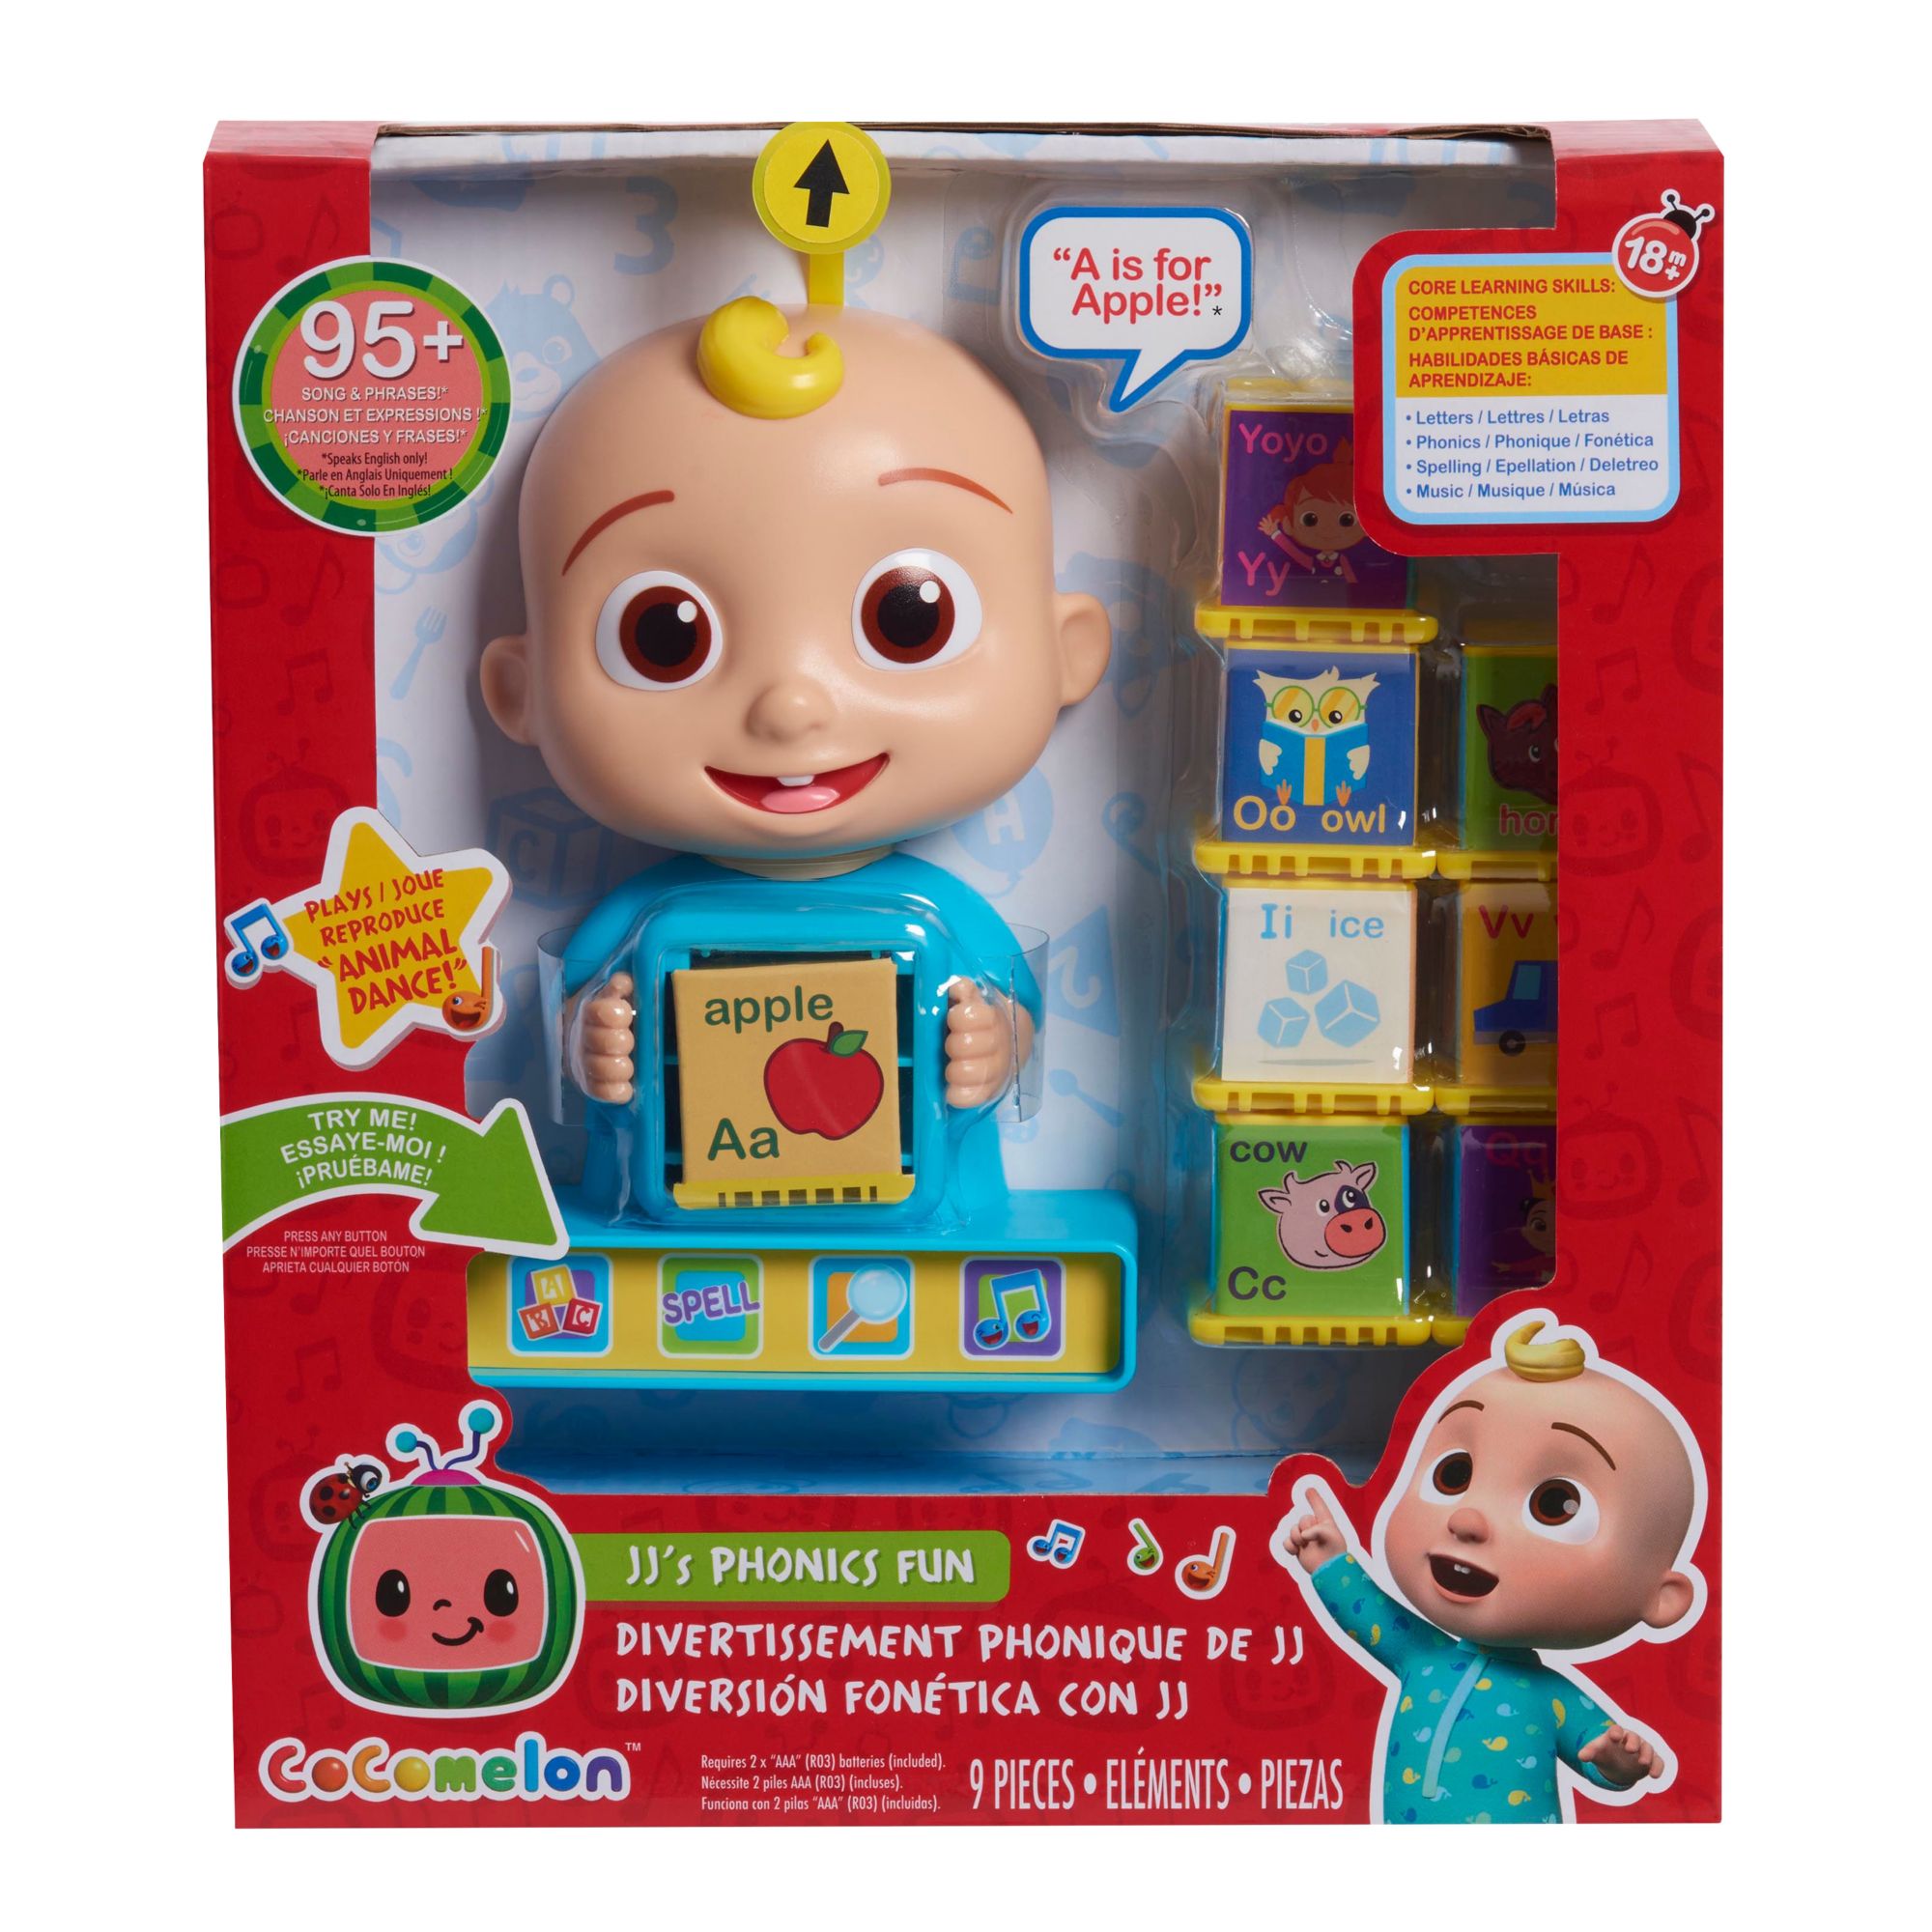 Cocomelon Toys in Influencer Toys 